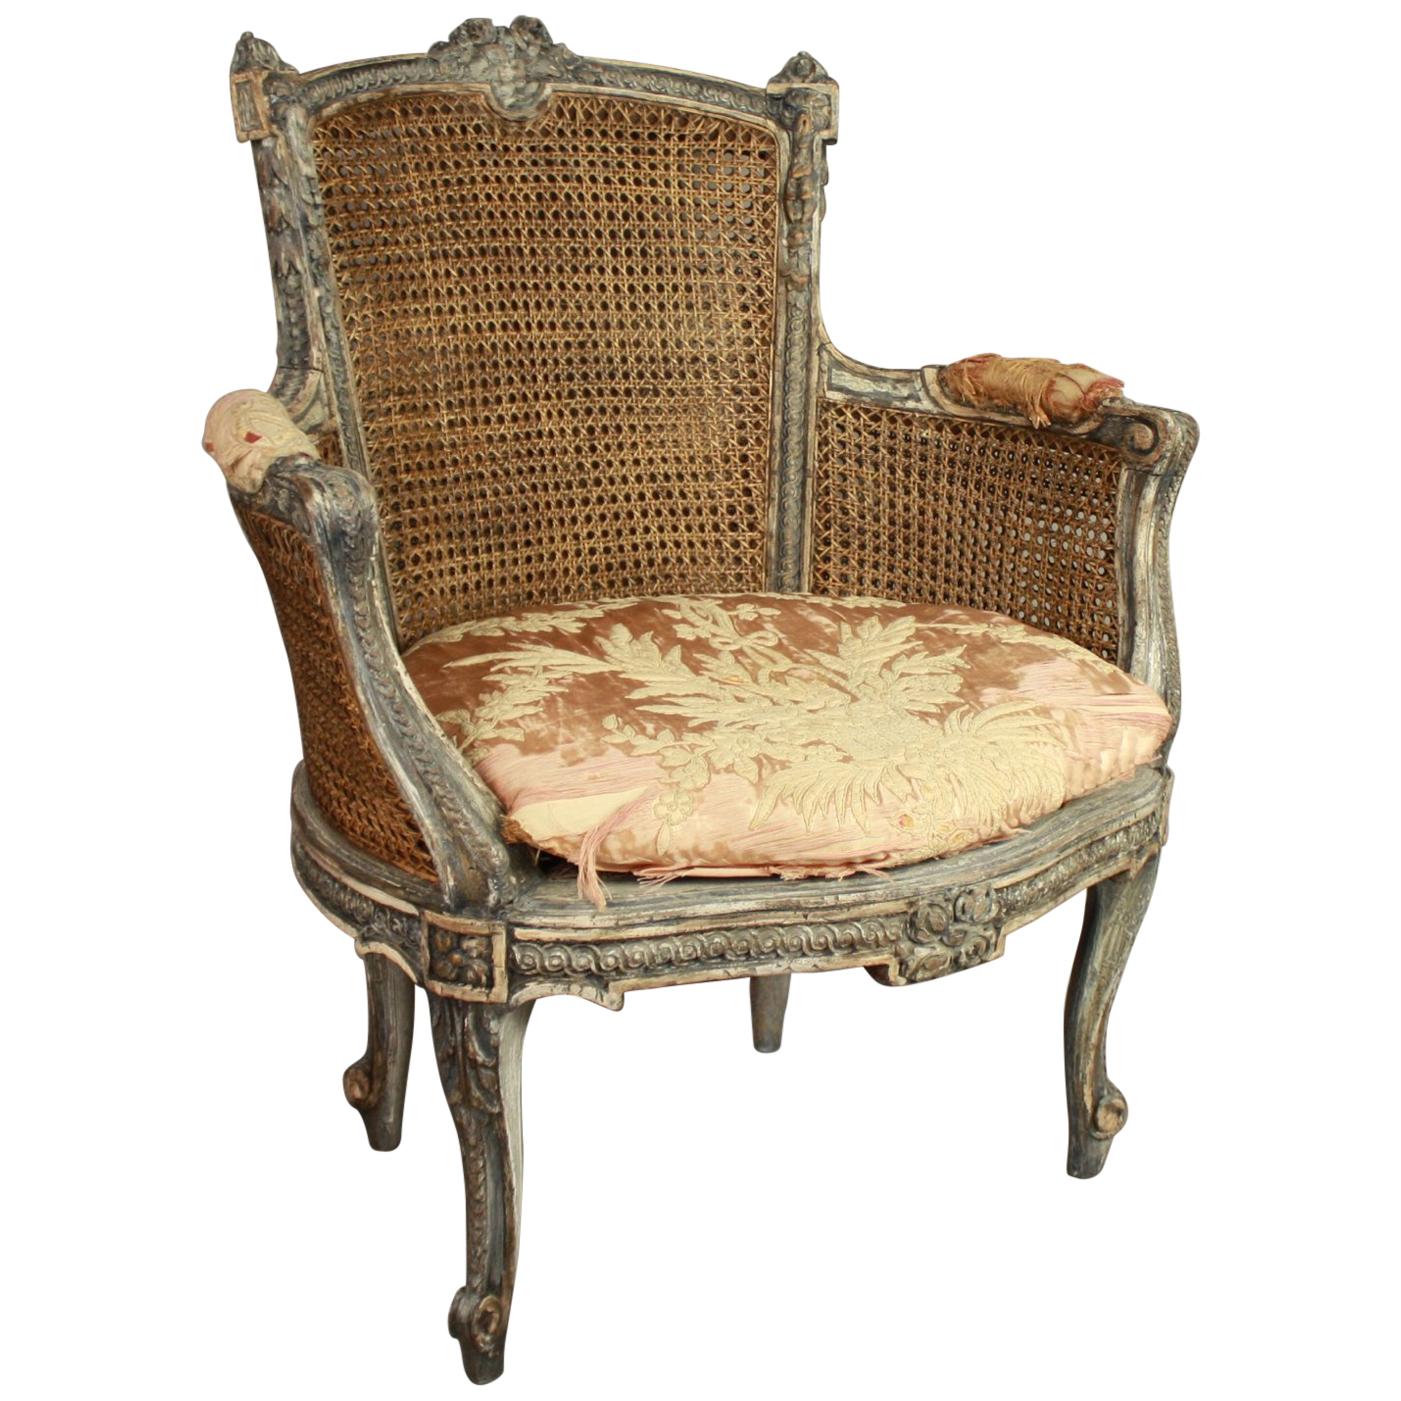 19th Century Louis XVI Style Caned and Painted Bergere or Armchair